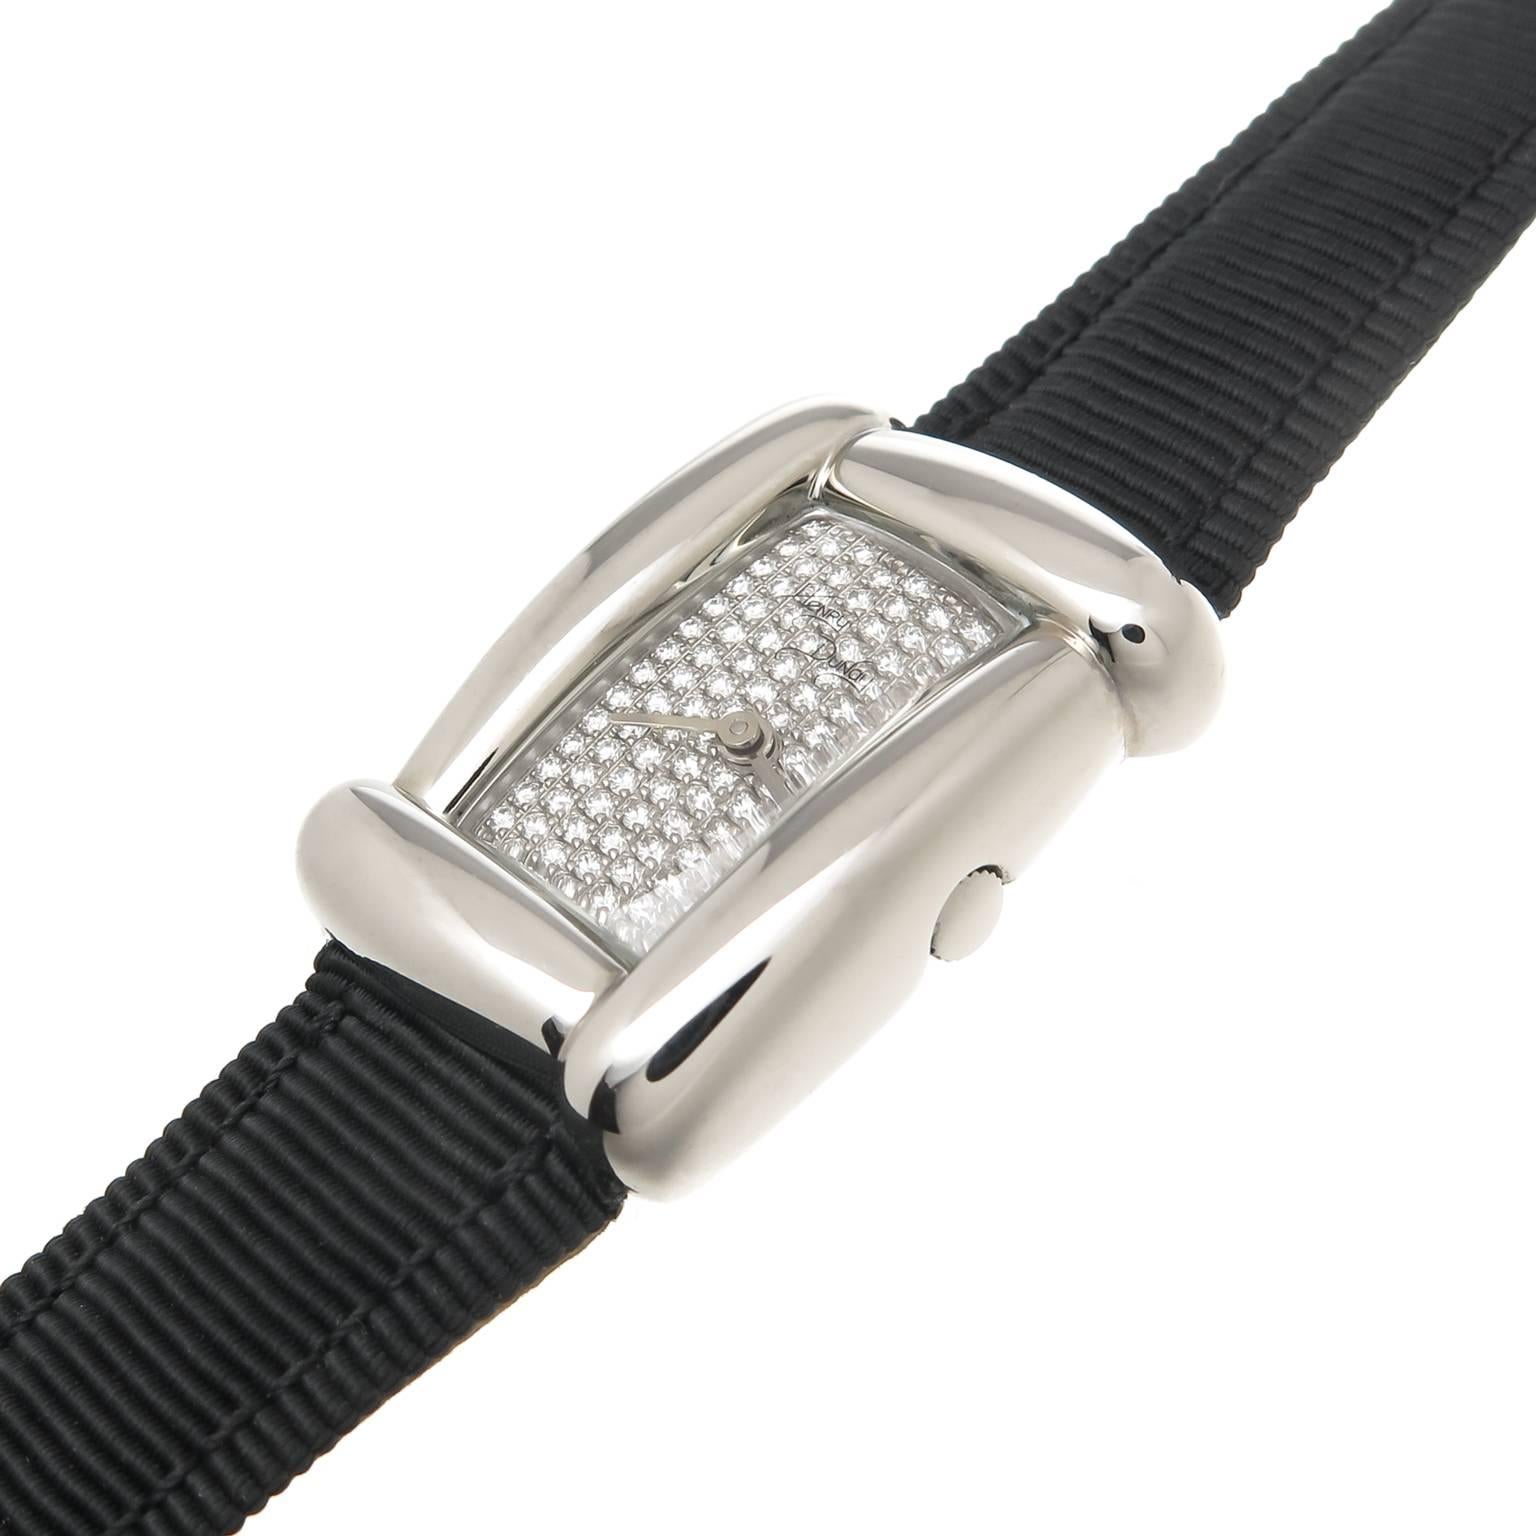 Circa 2005 Henry Dunay Medea collection Wrist Watch, 37 X 20 MM Stainless Steel water resistant case, Quartz Movement, Diamond Pave dial of round Brilliant cut Diamonds totaling approximately 1.30 Carat. 1/2 inch wide Leather backed Black Grosgrain